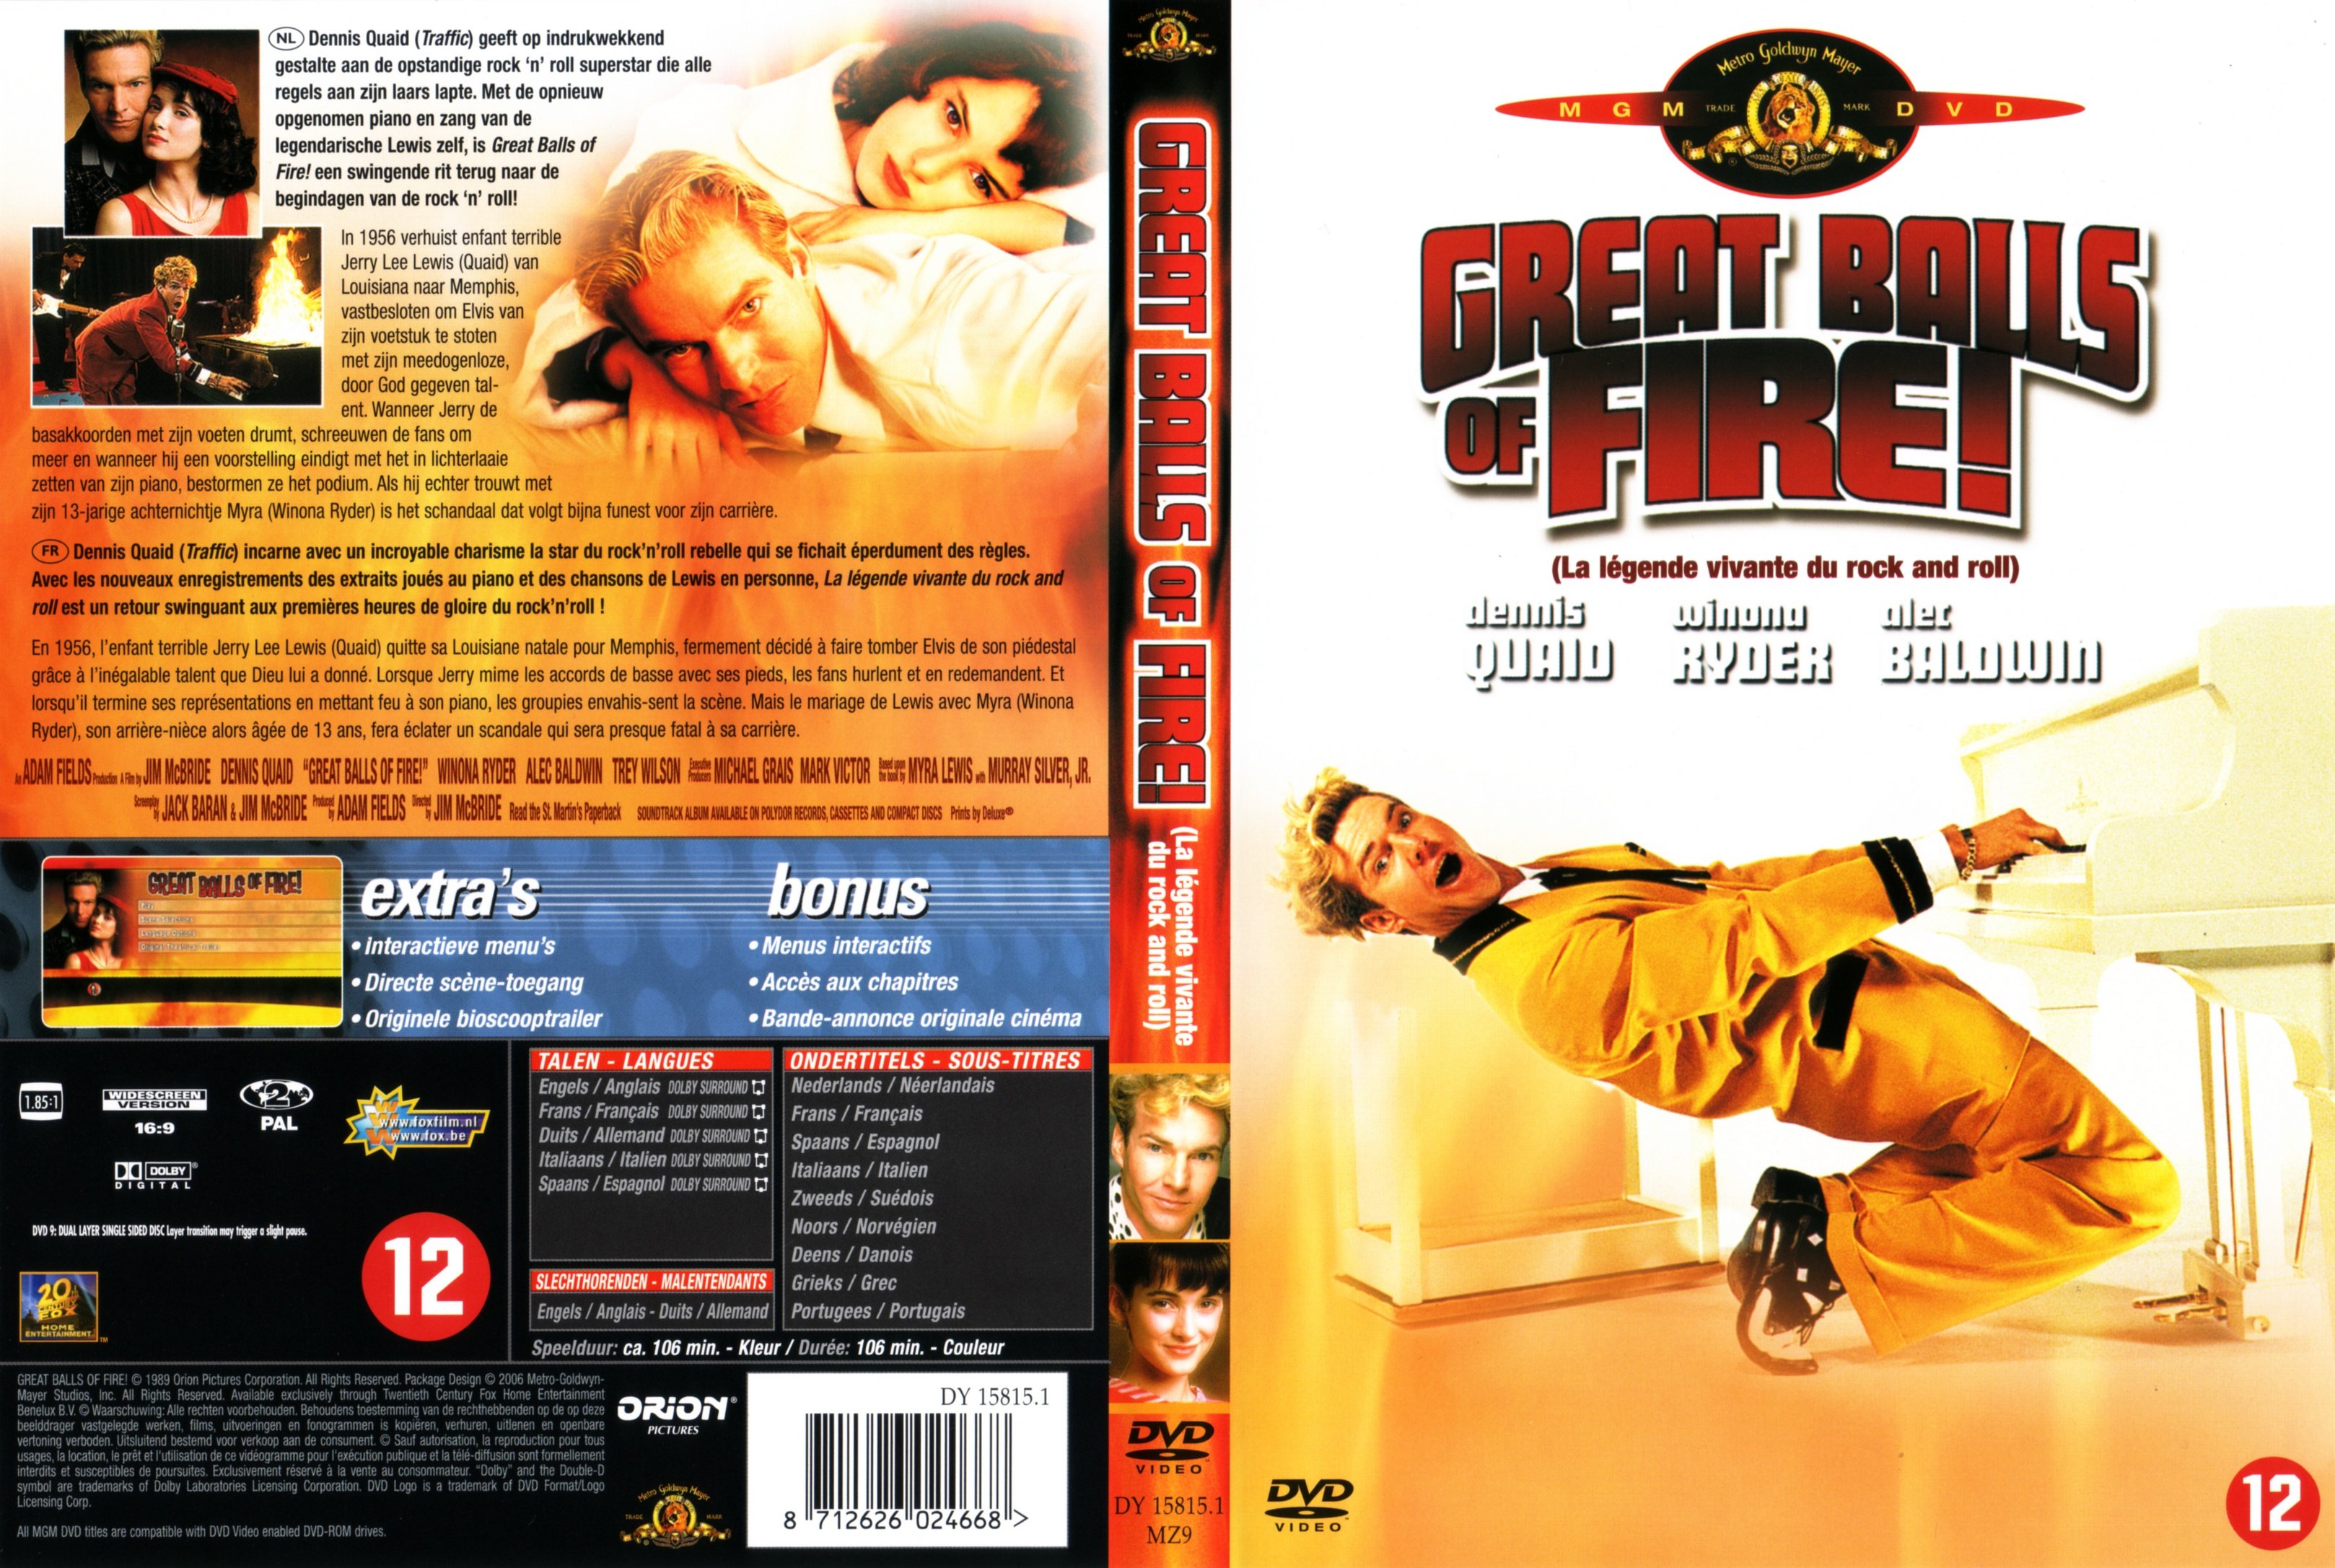 Jaquette DVD Great balls of fire